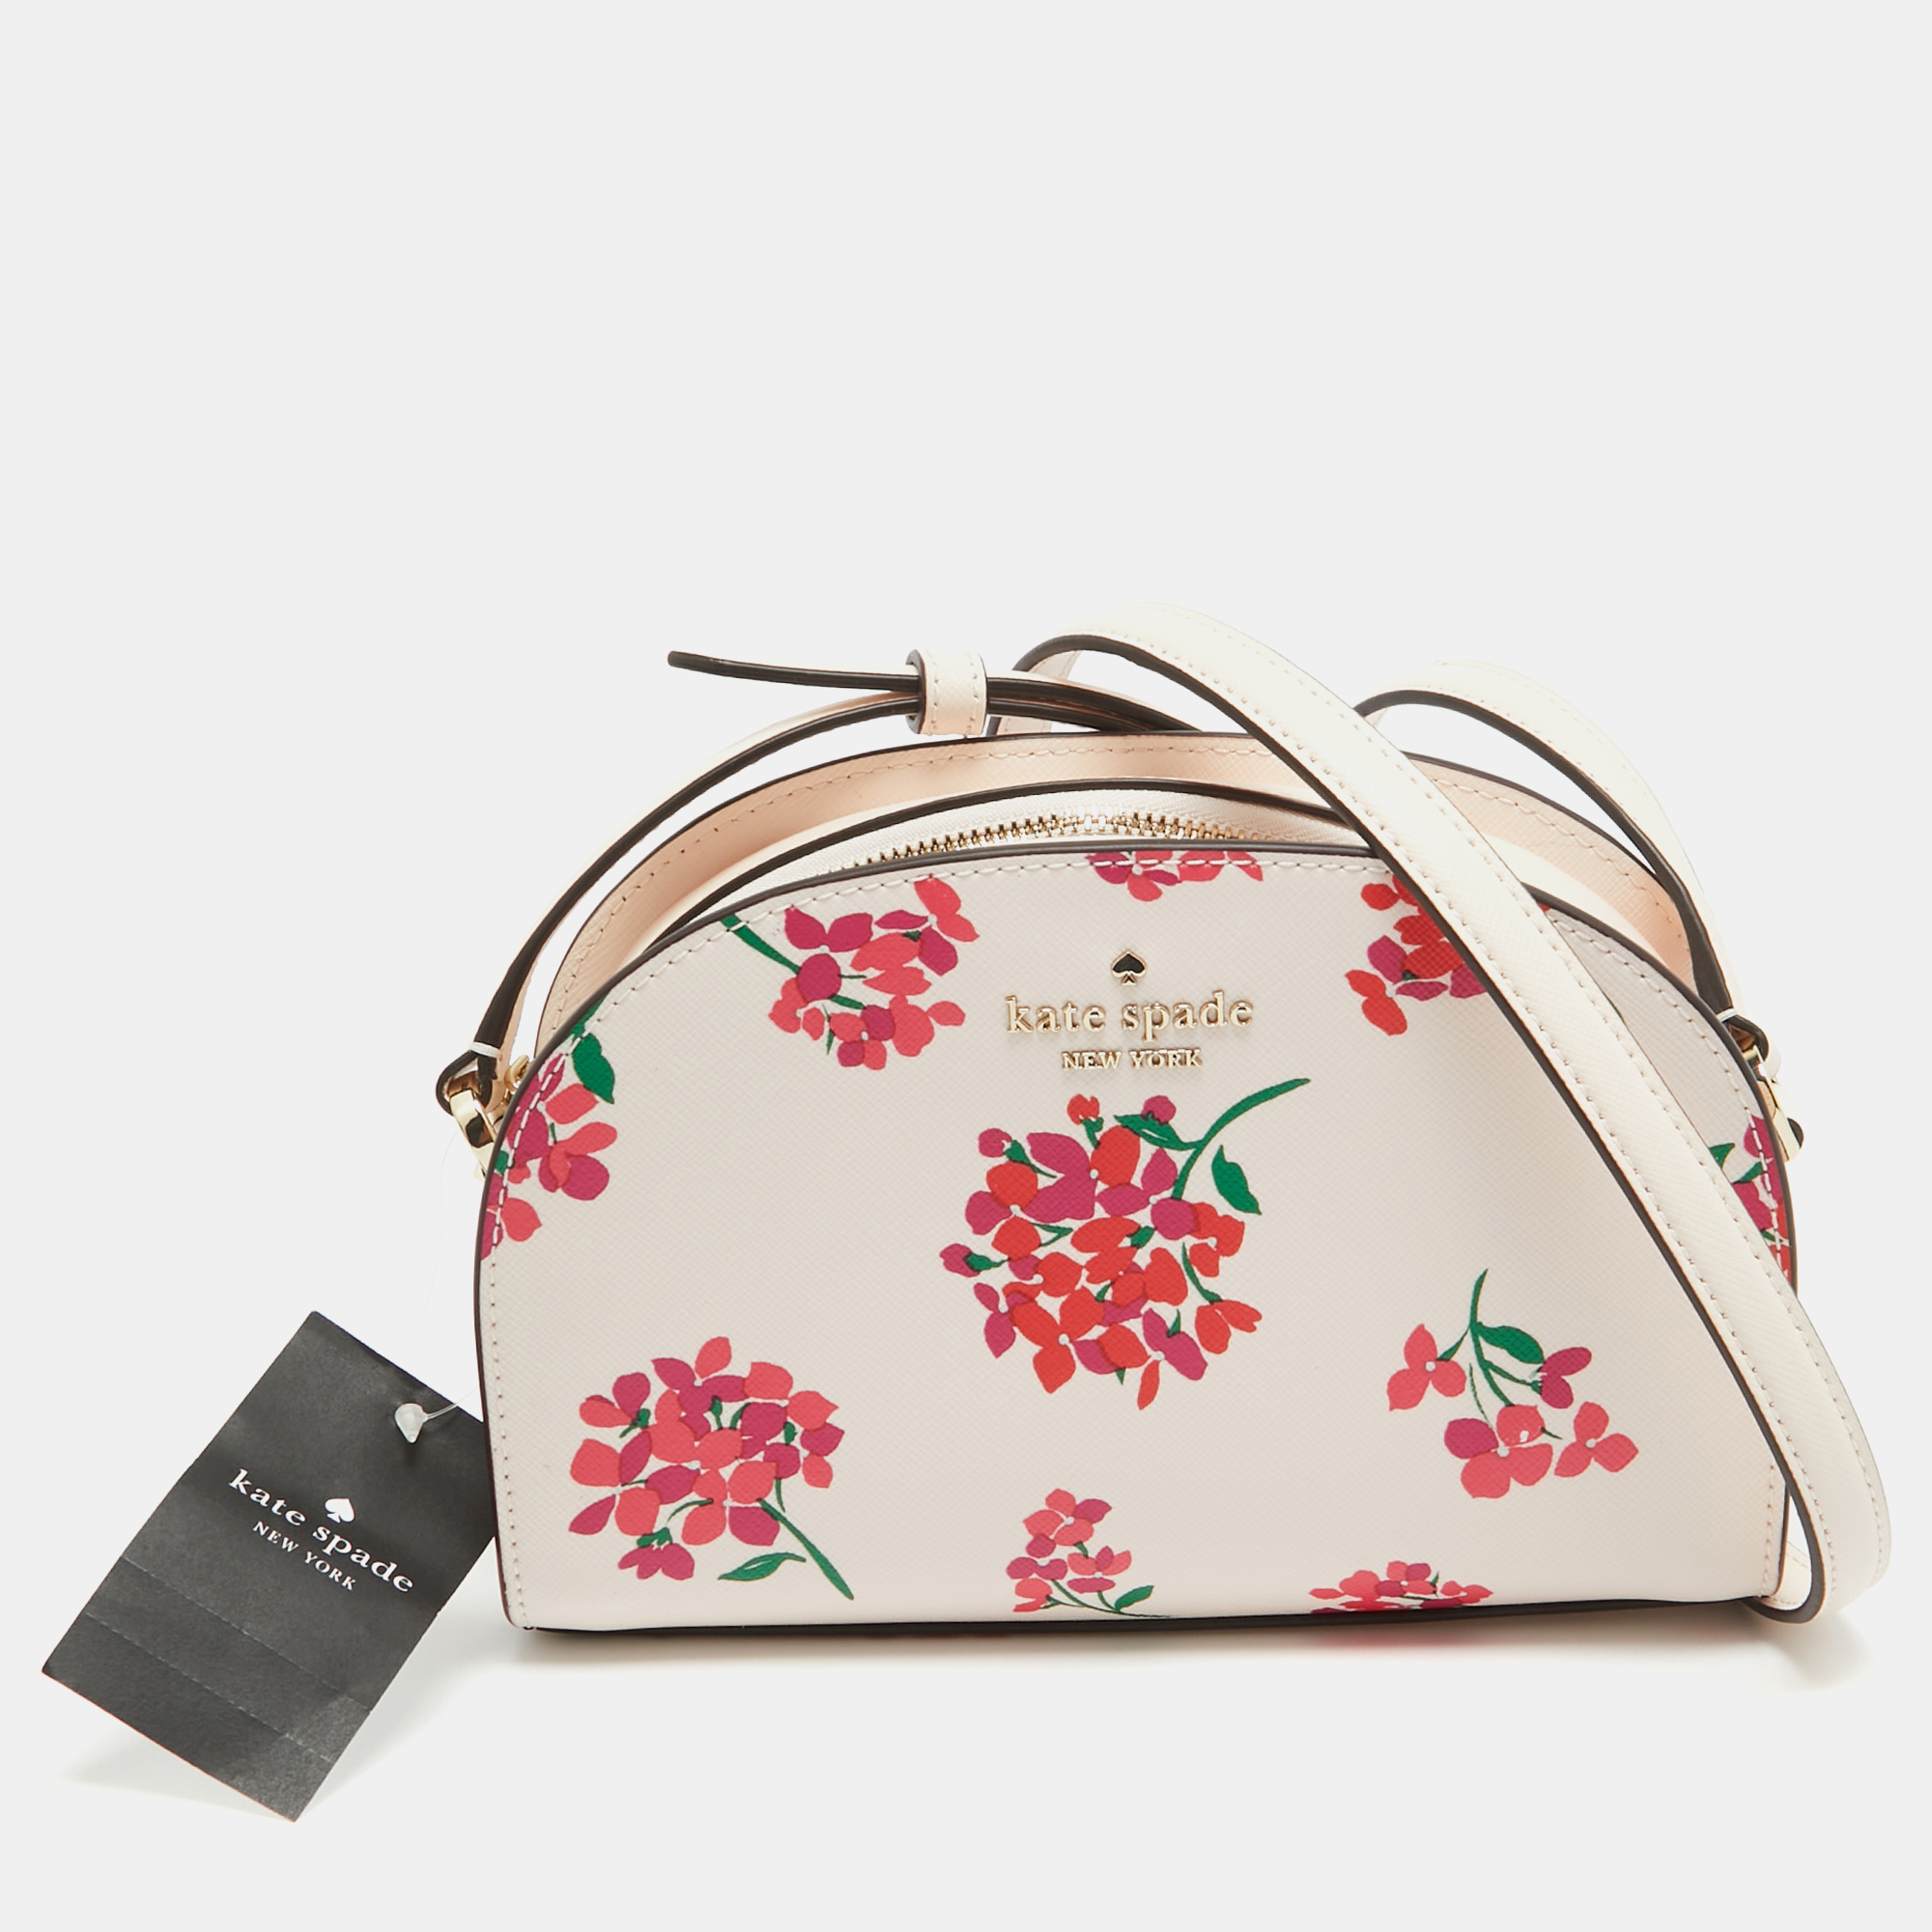 Kate spade multicolor floral print leather perry dome crossbody bag